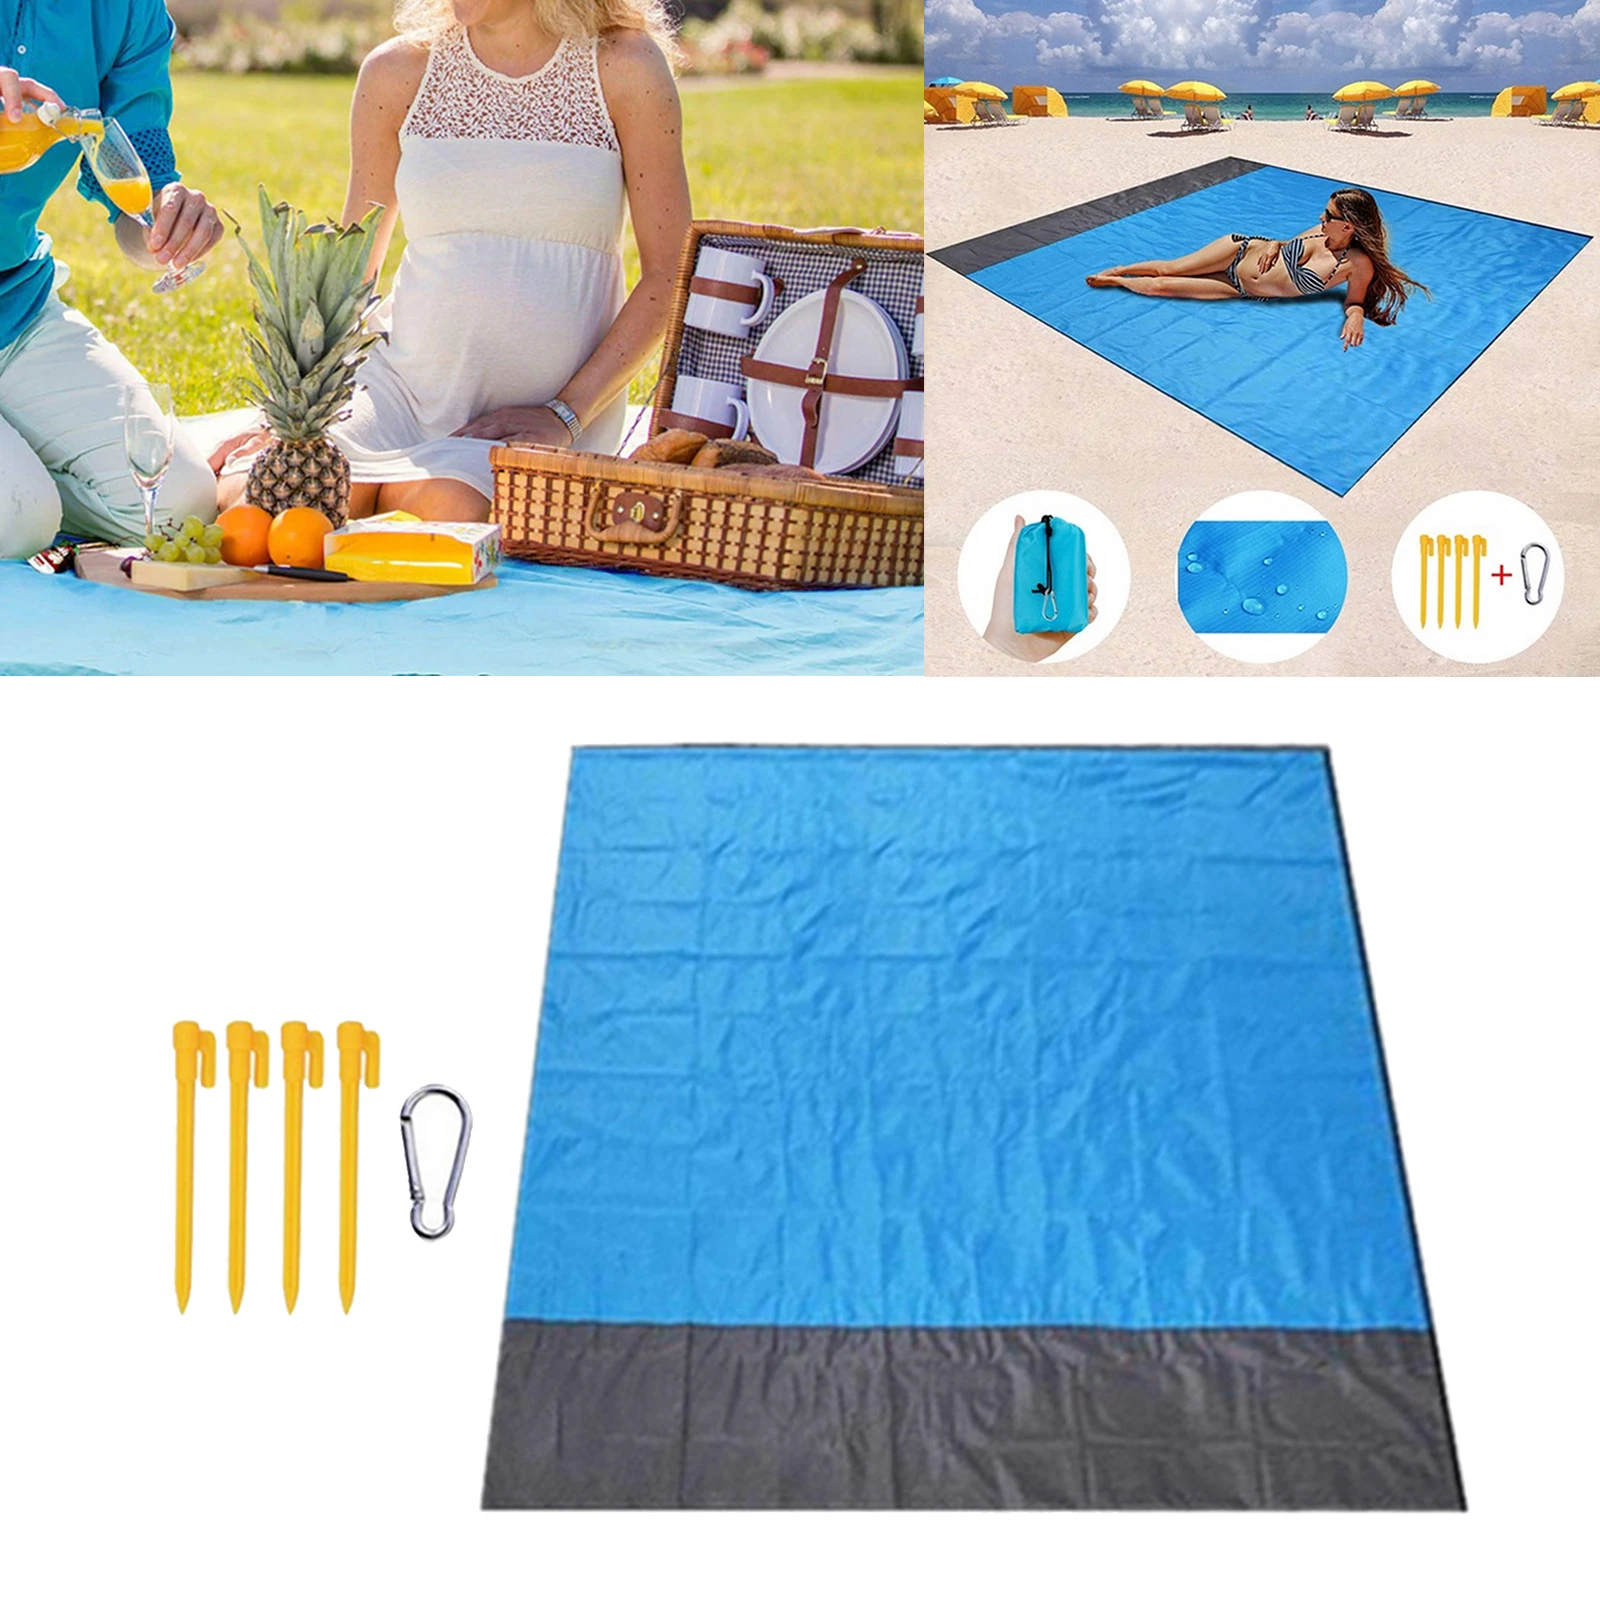 Large Sand Proof Beach Blanket Waterproof Lightweight Quick Drying Heat Resistant Nylon Outdoor Sheet Mat Camping Accessories